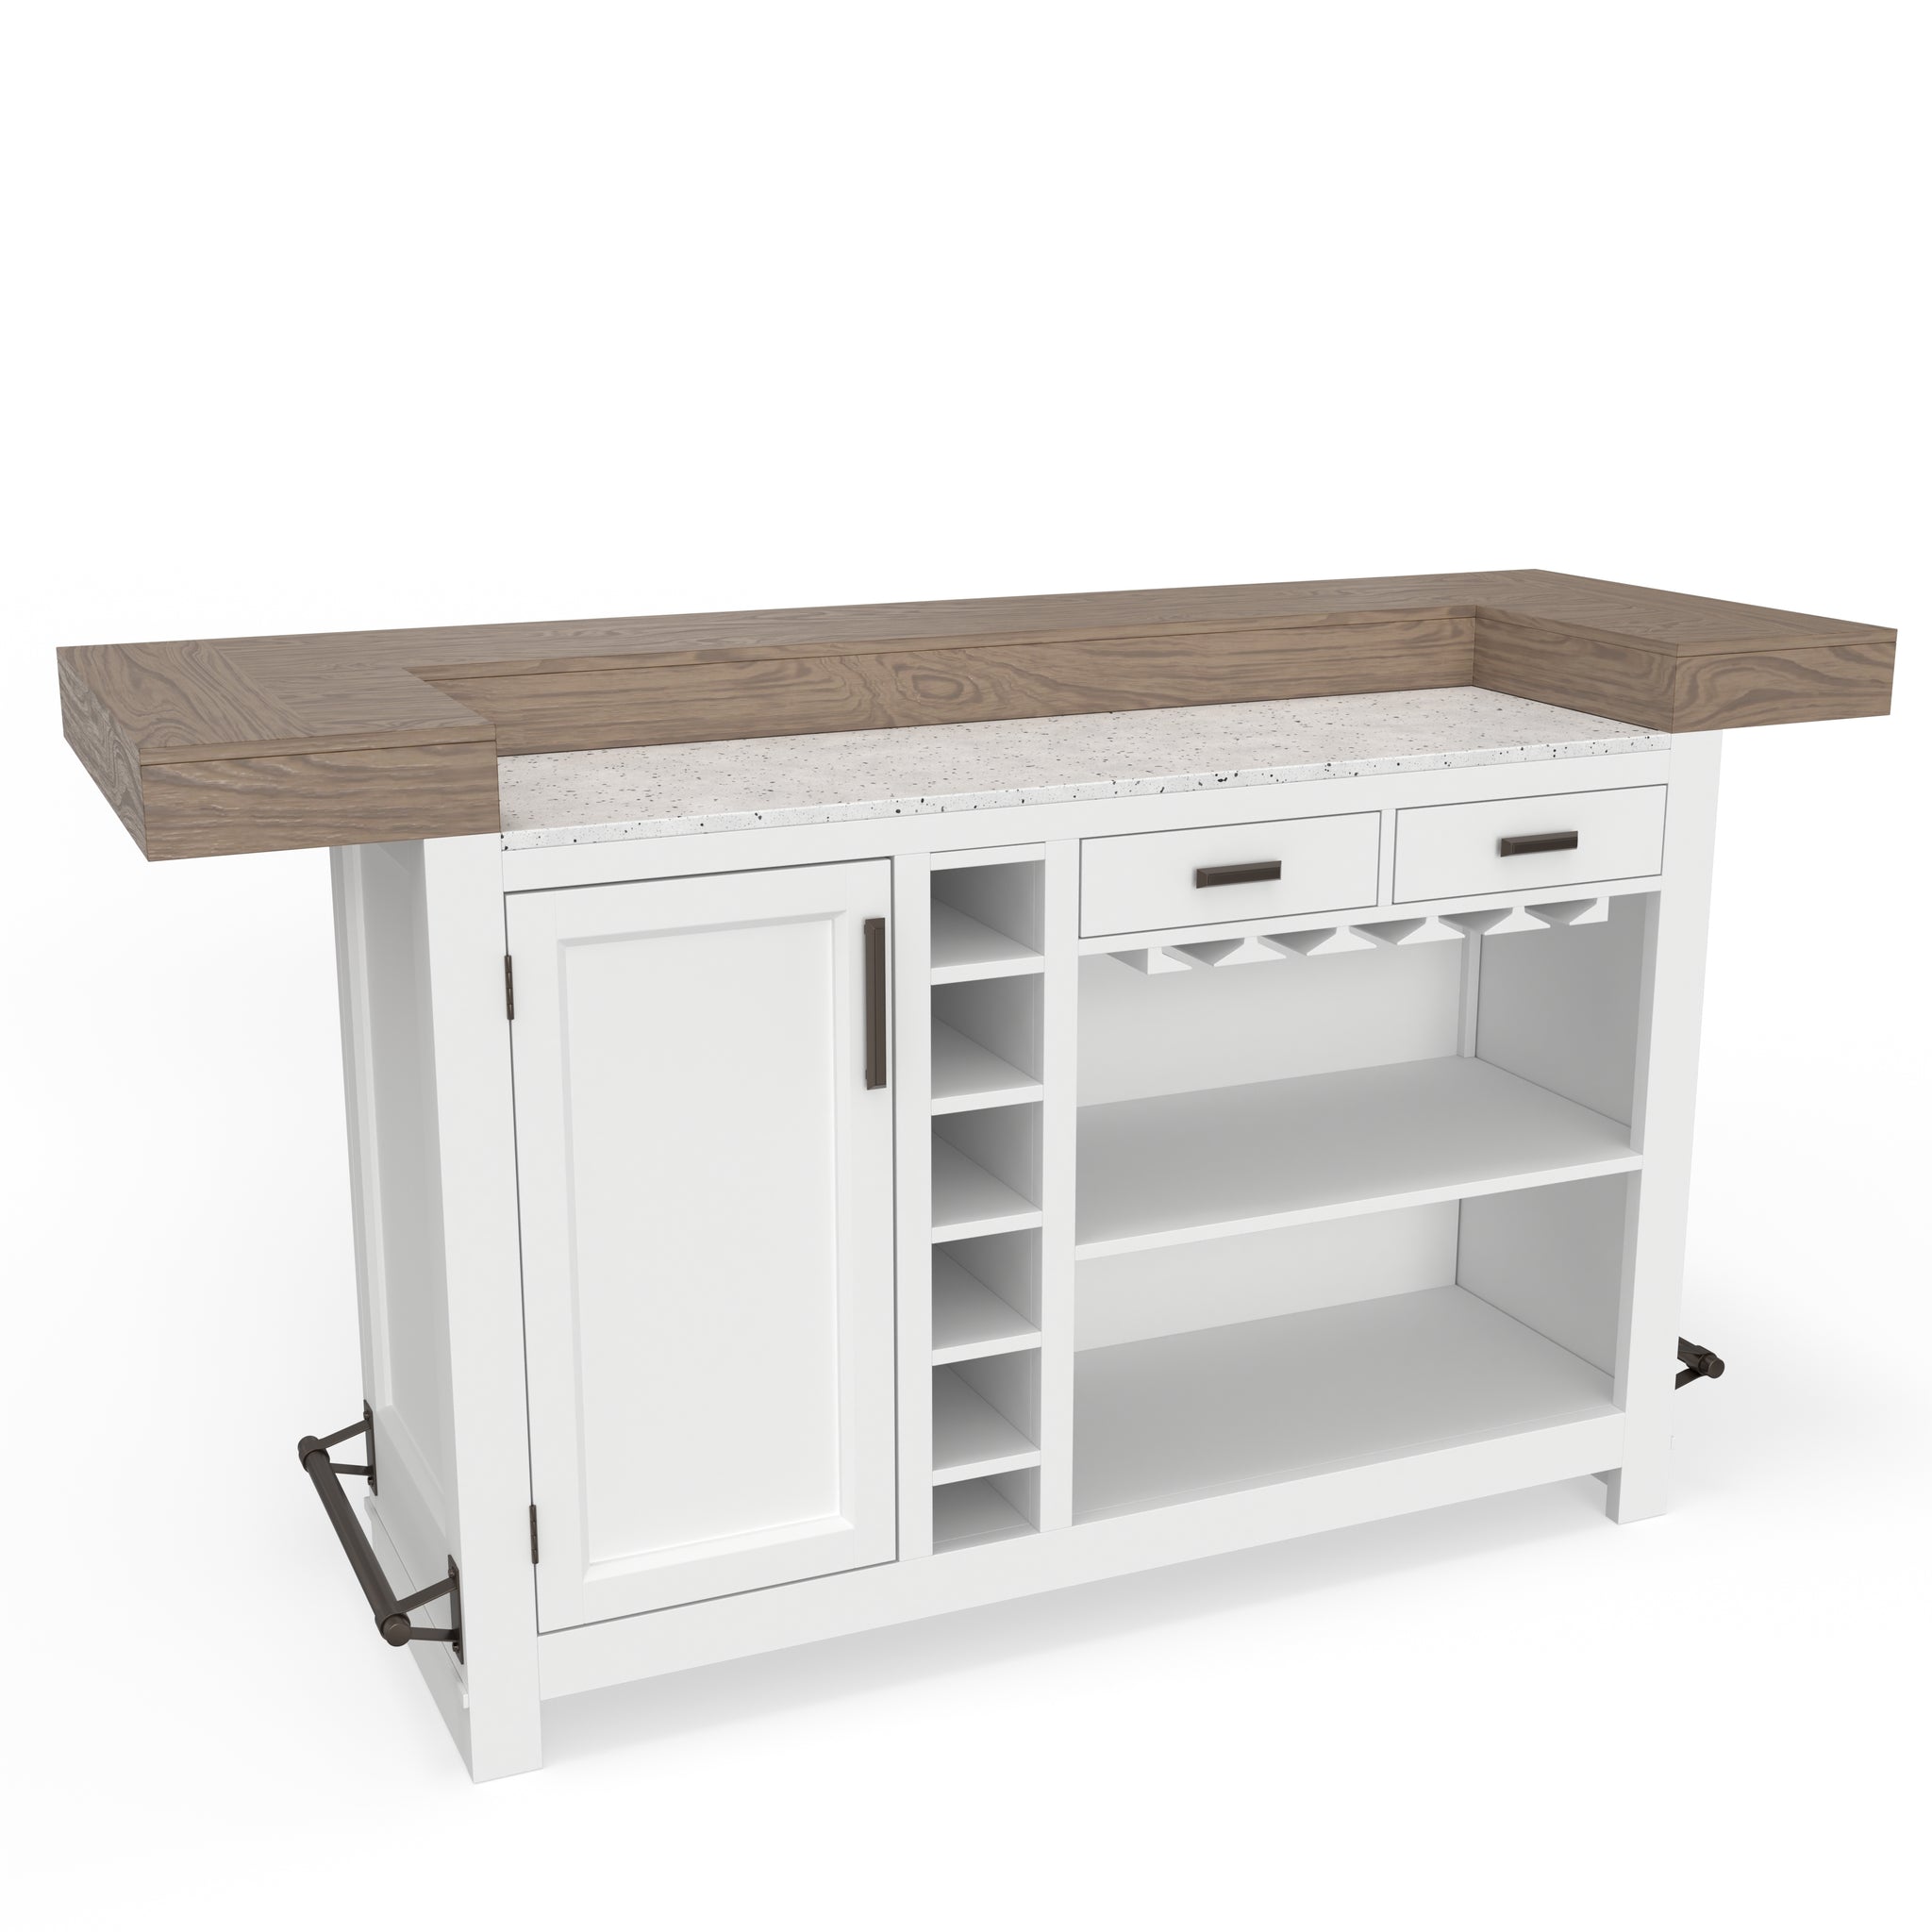 AMERICANA MODERN DINING quartz in. Parker 78 House with - Complete Bar Furniture